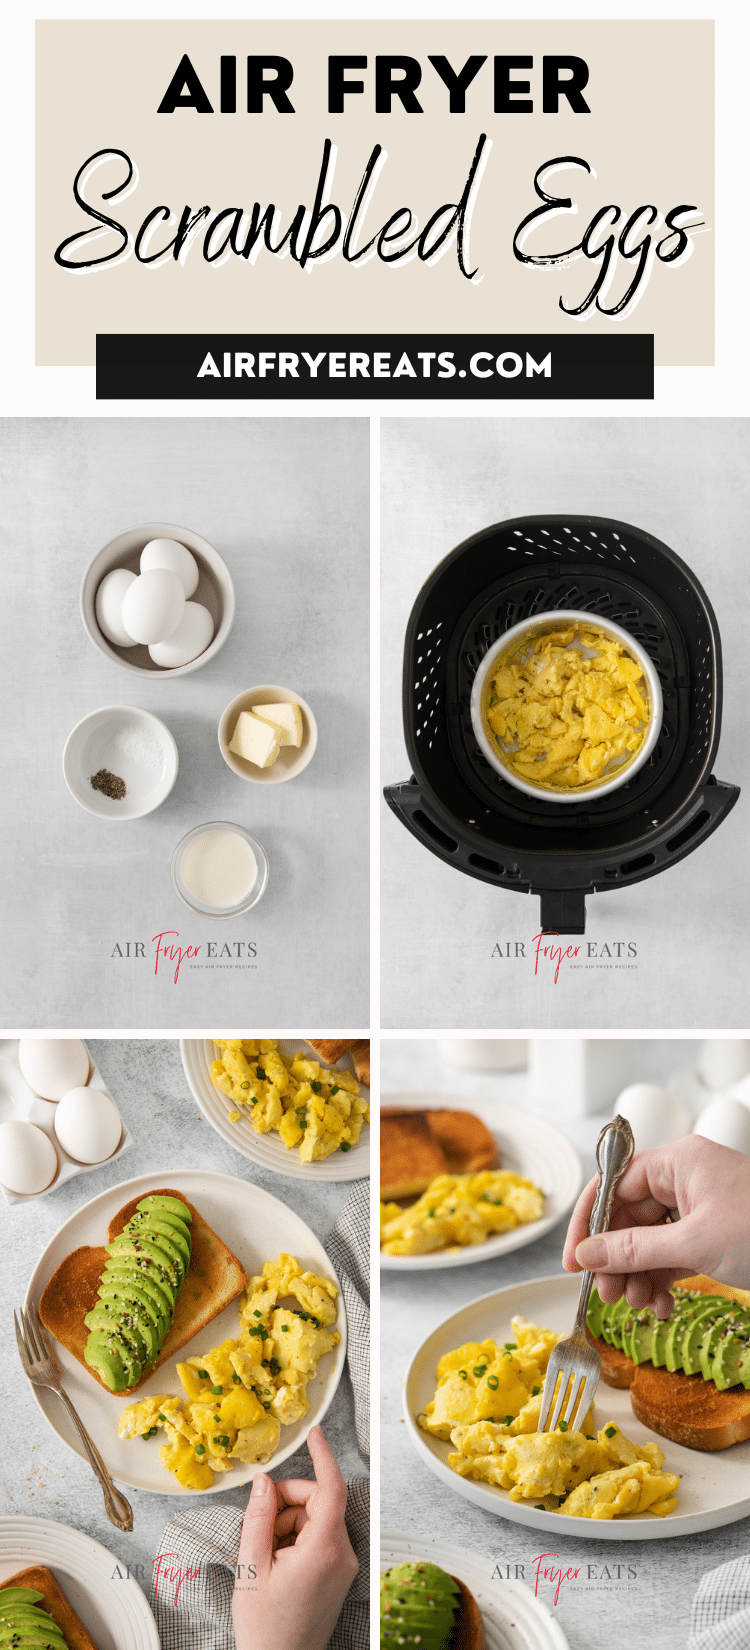 Making Scrambled Eggs in the Air Fryer is the fastest, easiest way to get a protein-packed breakfast on the table! It only takes 5 minutes to make air fryer scrambled eggs that are perfectly fluffy. via @vegetarianmamma